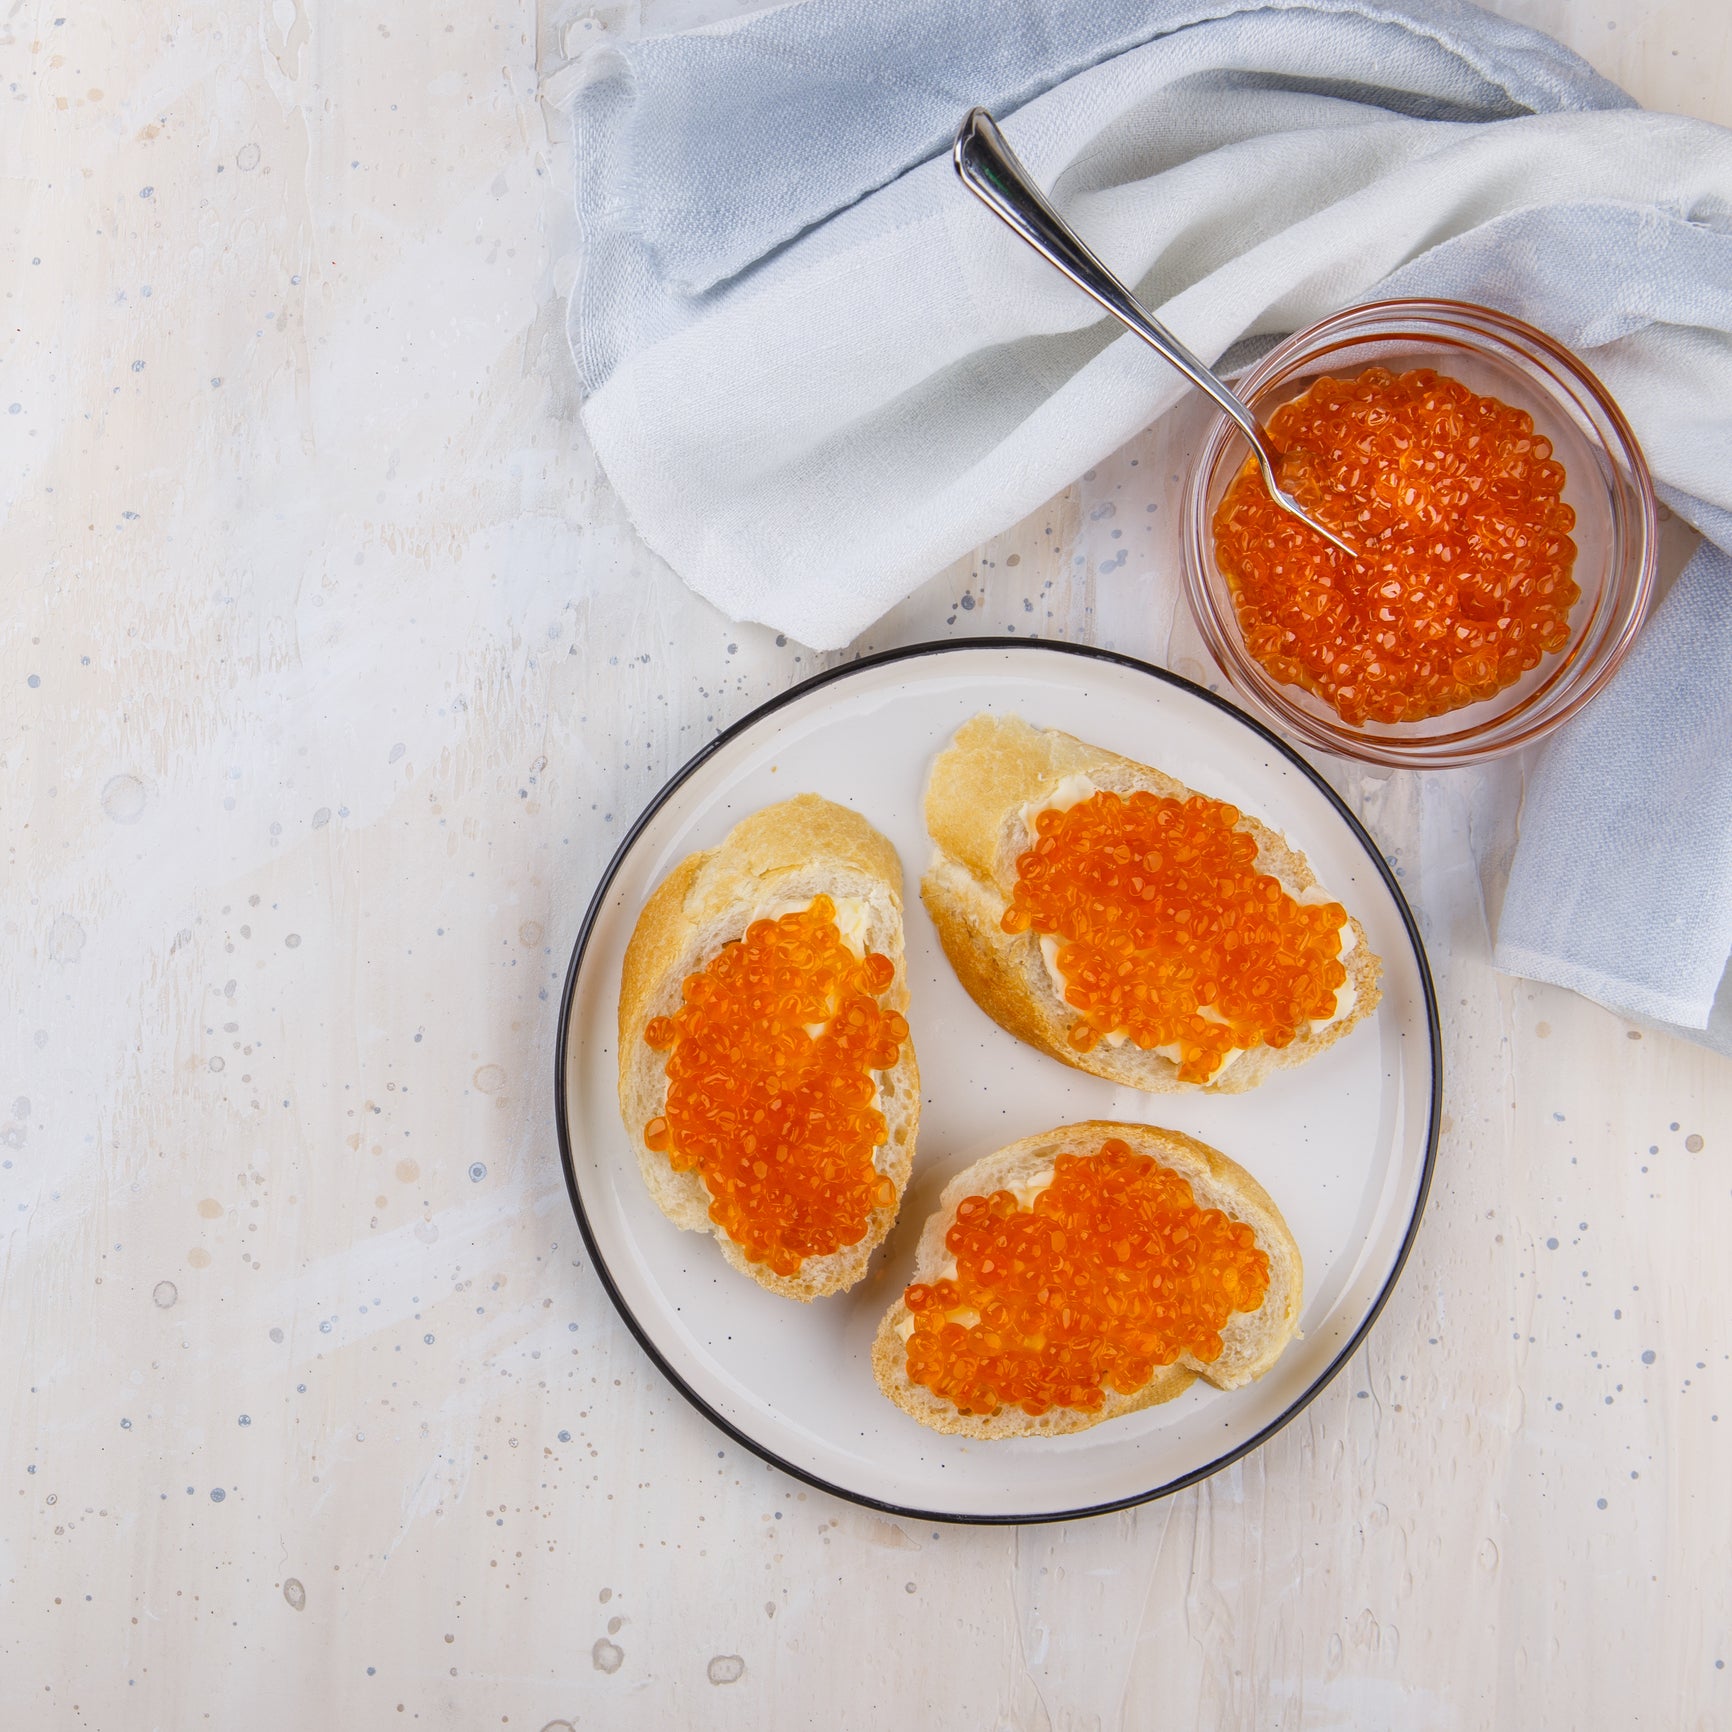 A spoonful of vibrant red salmon caviar, showcasing its rich color and texture, symbolizing both luxury and health benefits